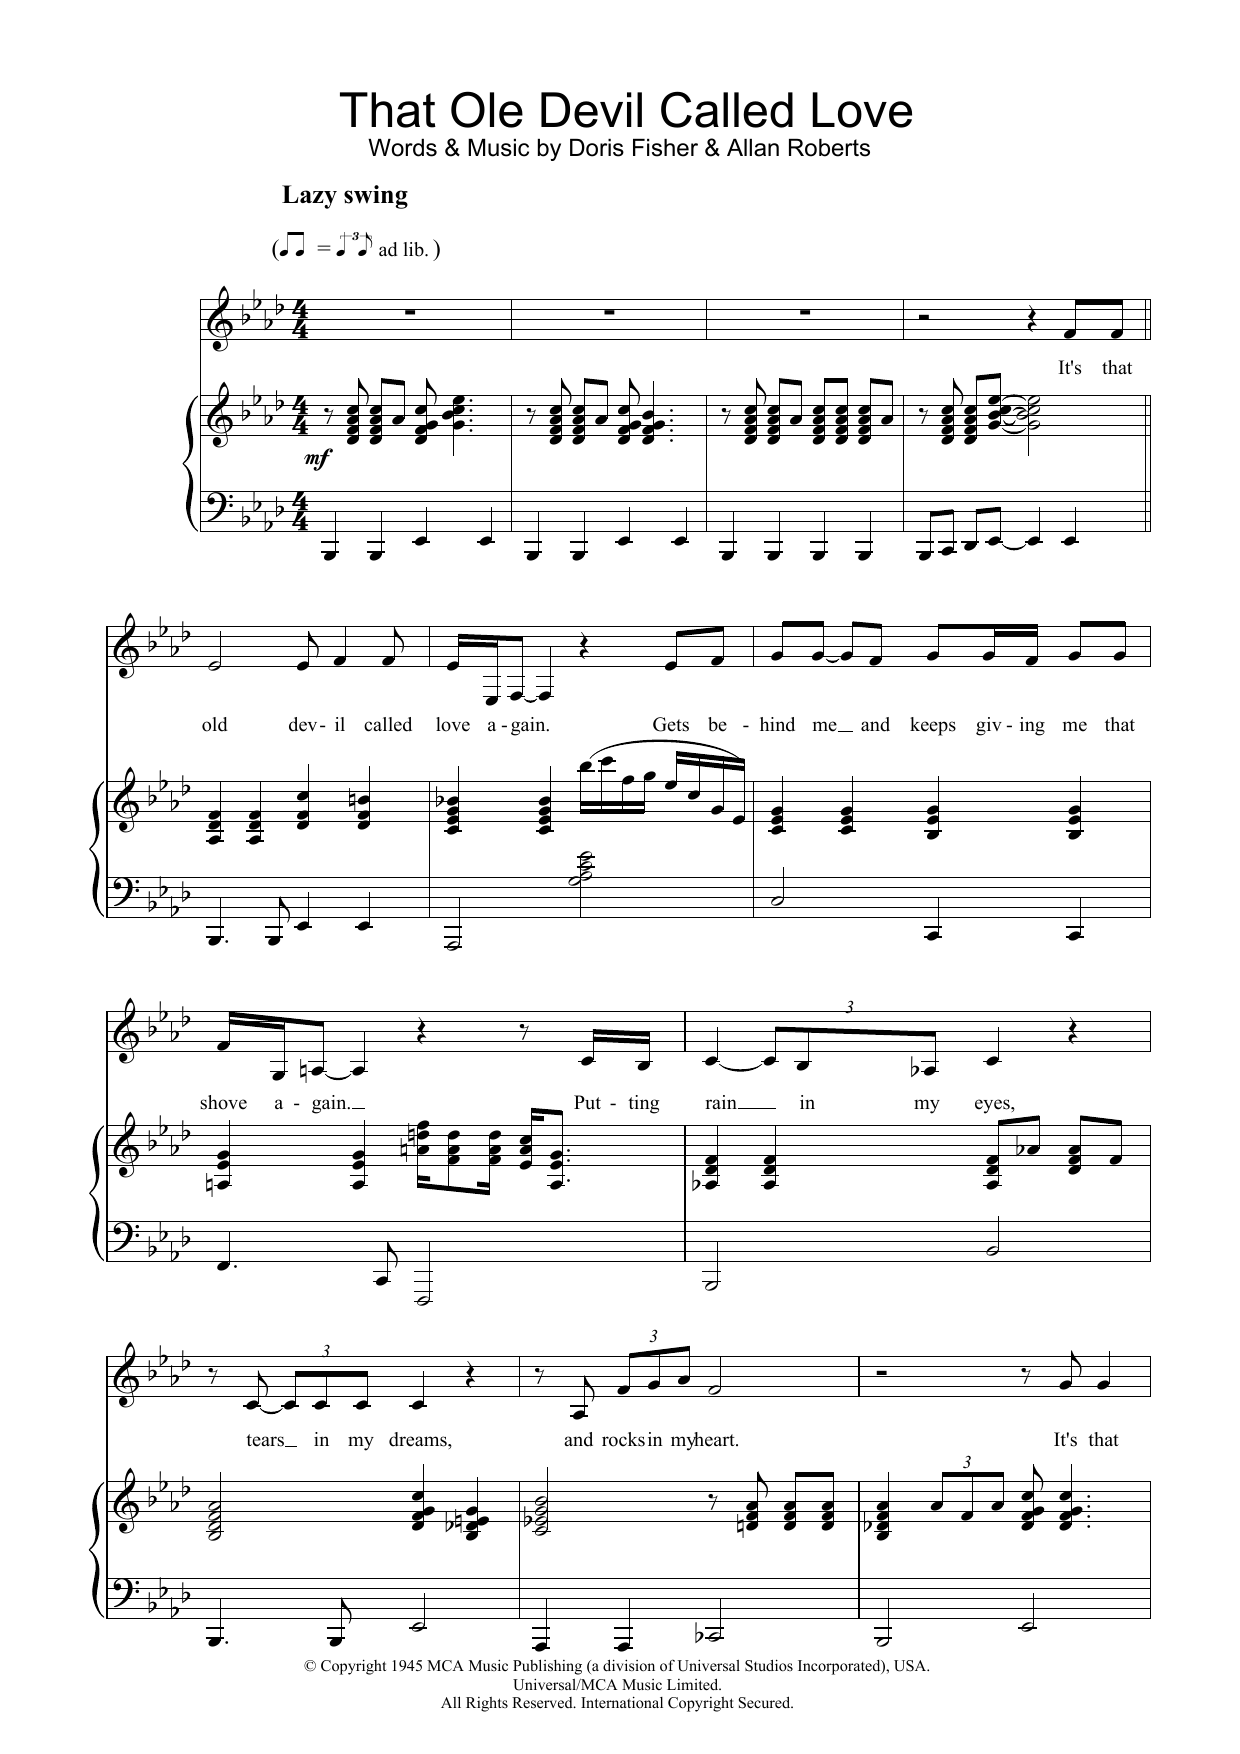 Download Diana Krall That Ole Devil Called Love Sheet Music